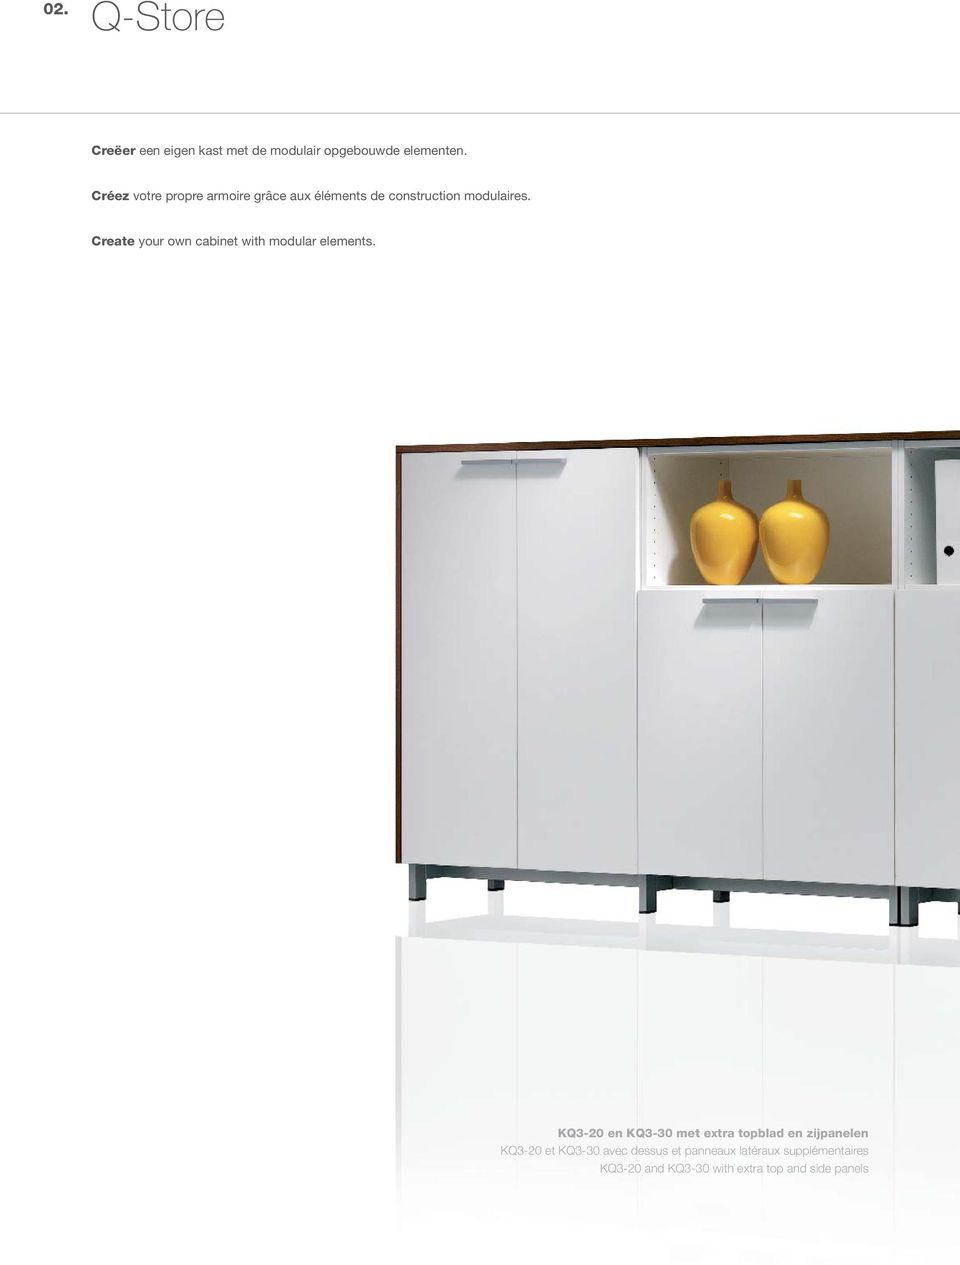 Create your own cabinet with modular elements.